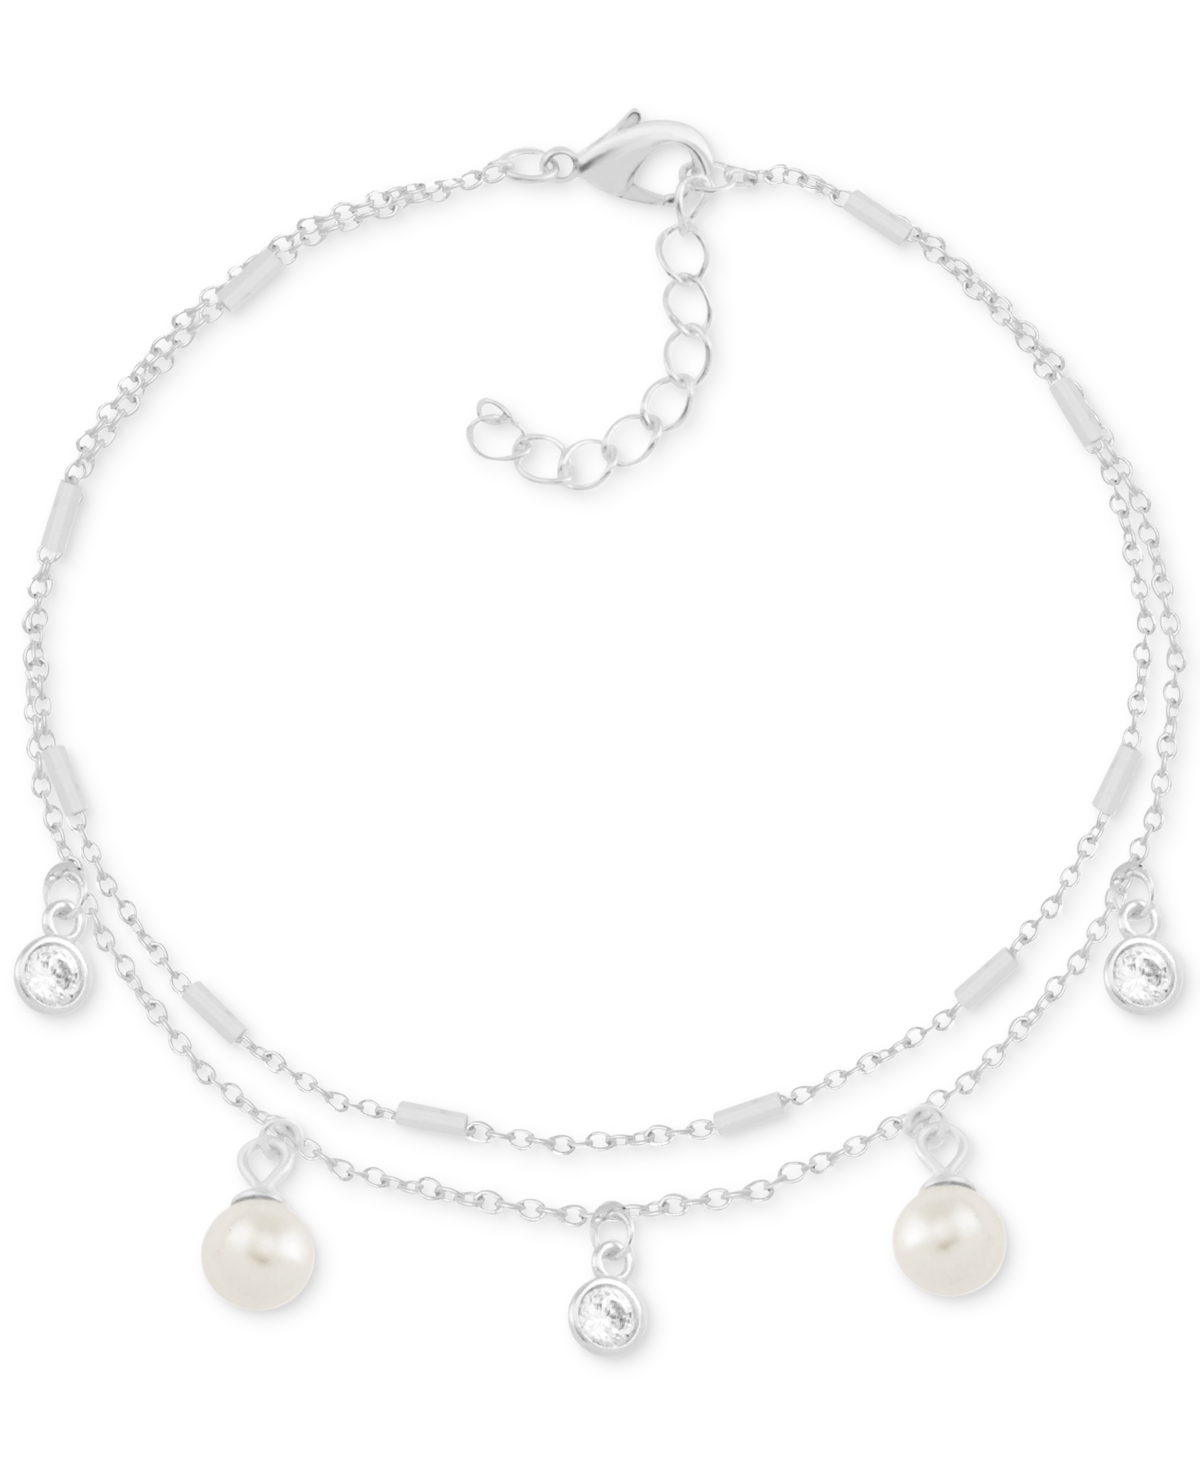 Imitation Pearl & Crystal Two-Row Silver Plate Anklet - Silver